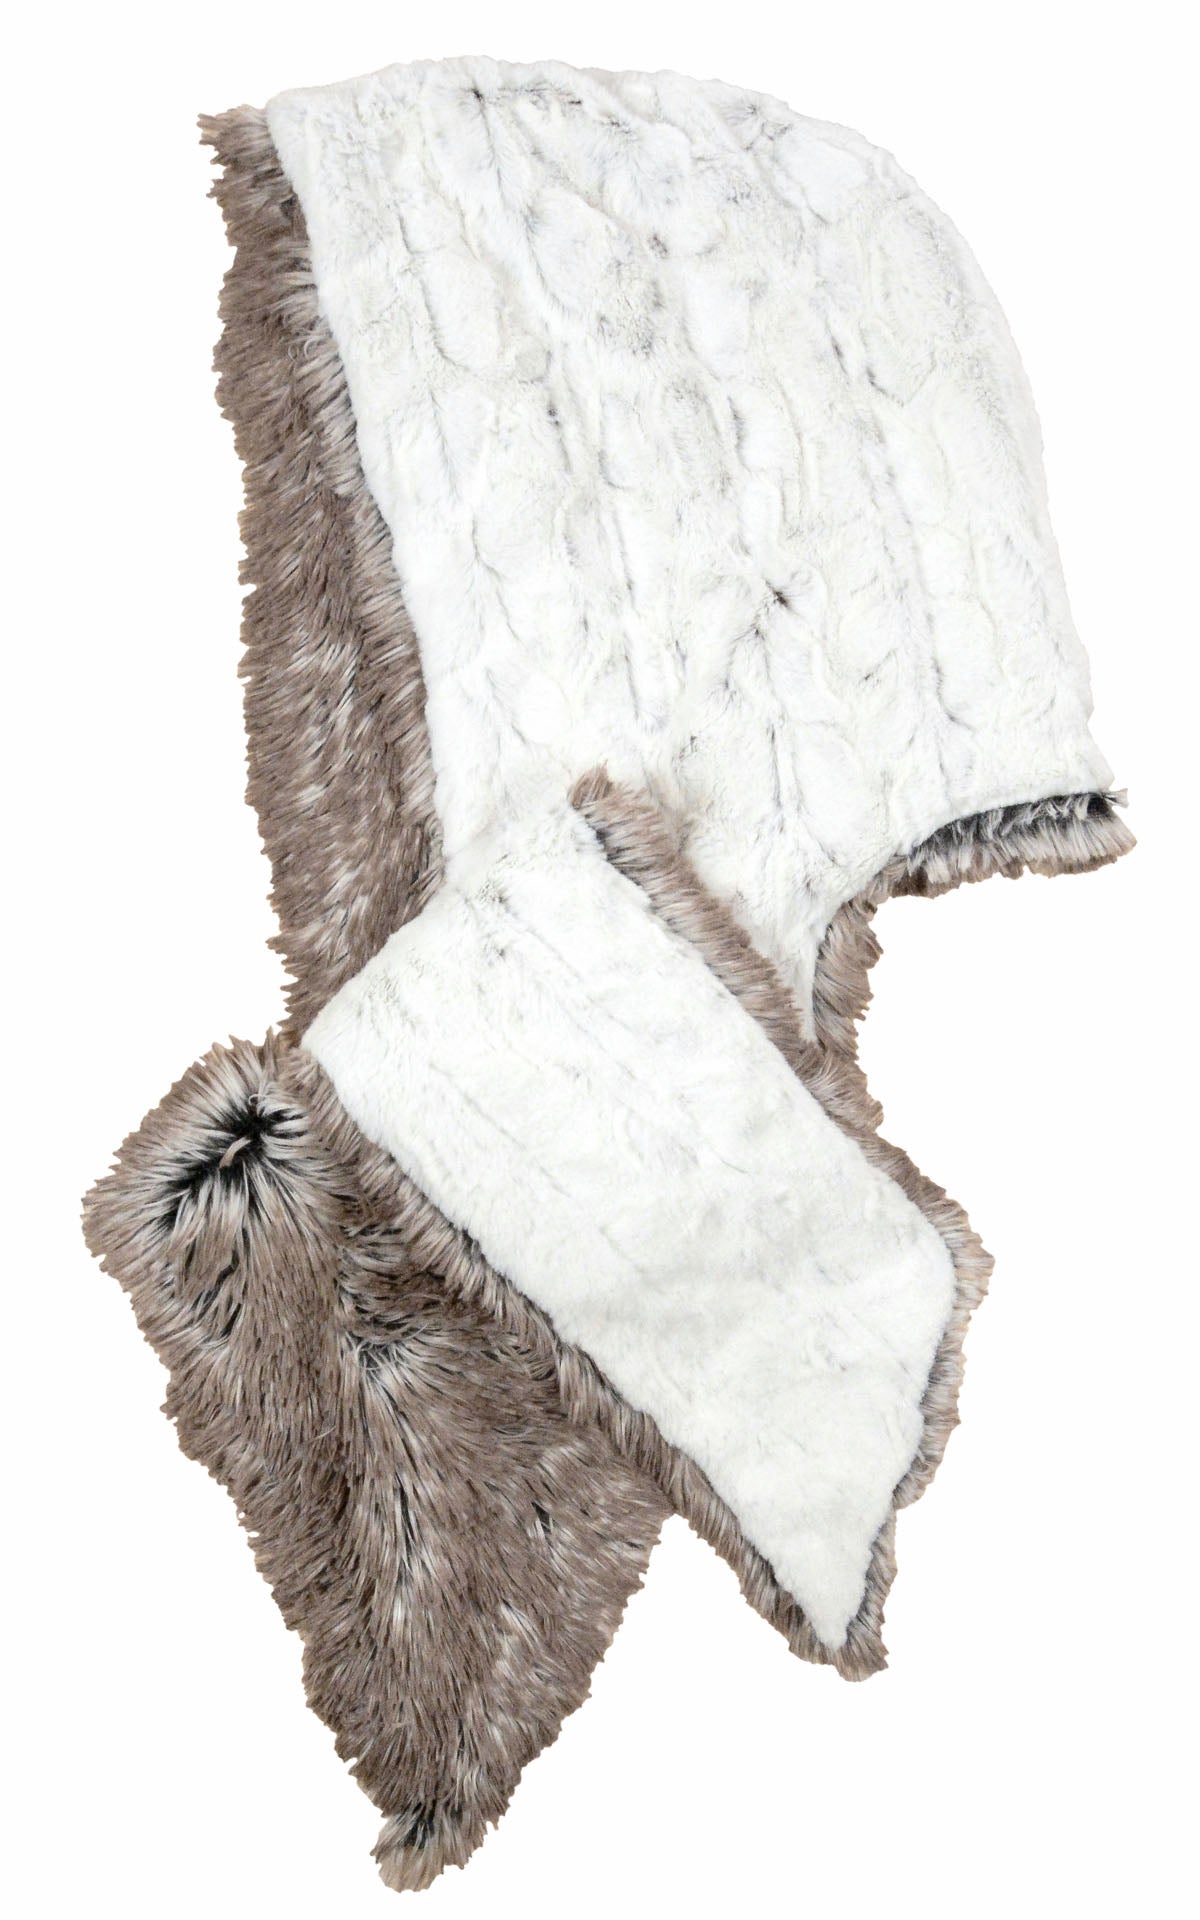 Pandemonium Millinery Hoody Scarf - Arctic Fox Faux Fur with Luxury Faux Fur in Winters Frost